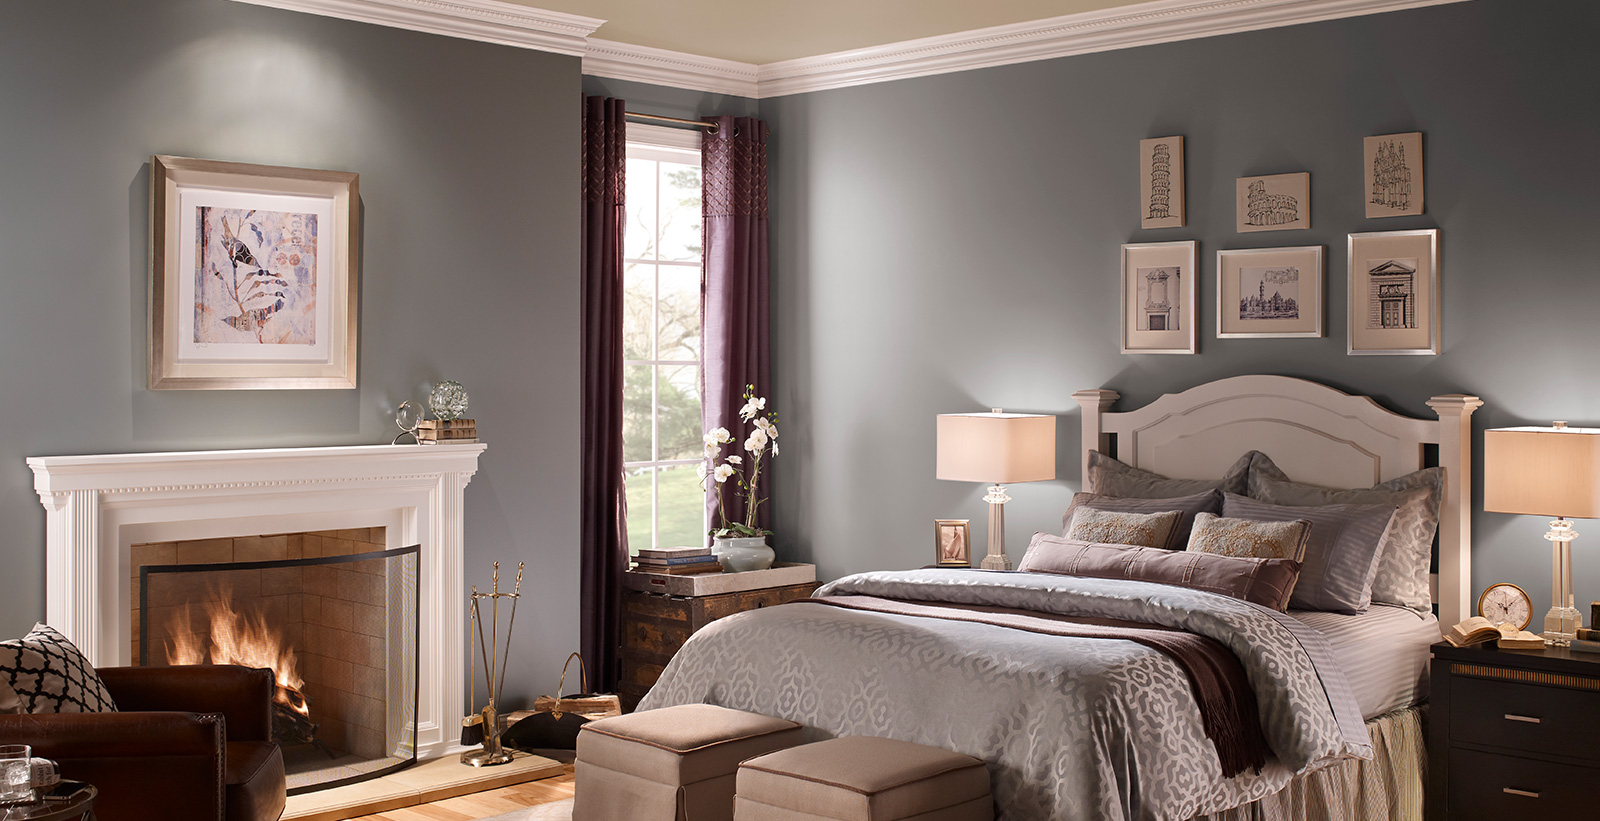 Classic bedroom with grayish blue on walls, white on trim and fireplace, and light tan on ceiling